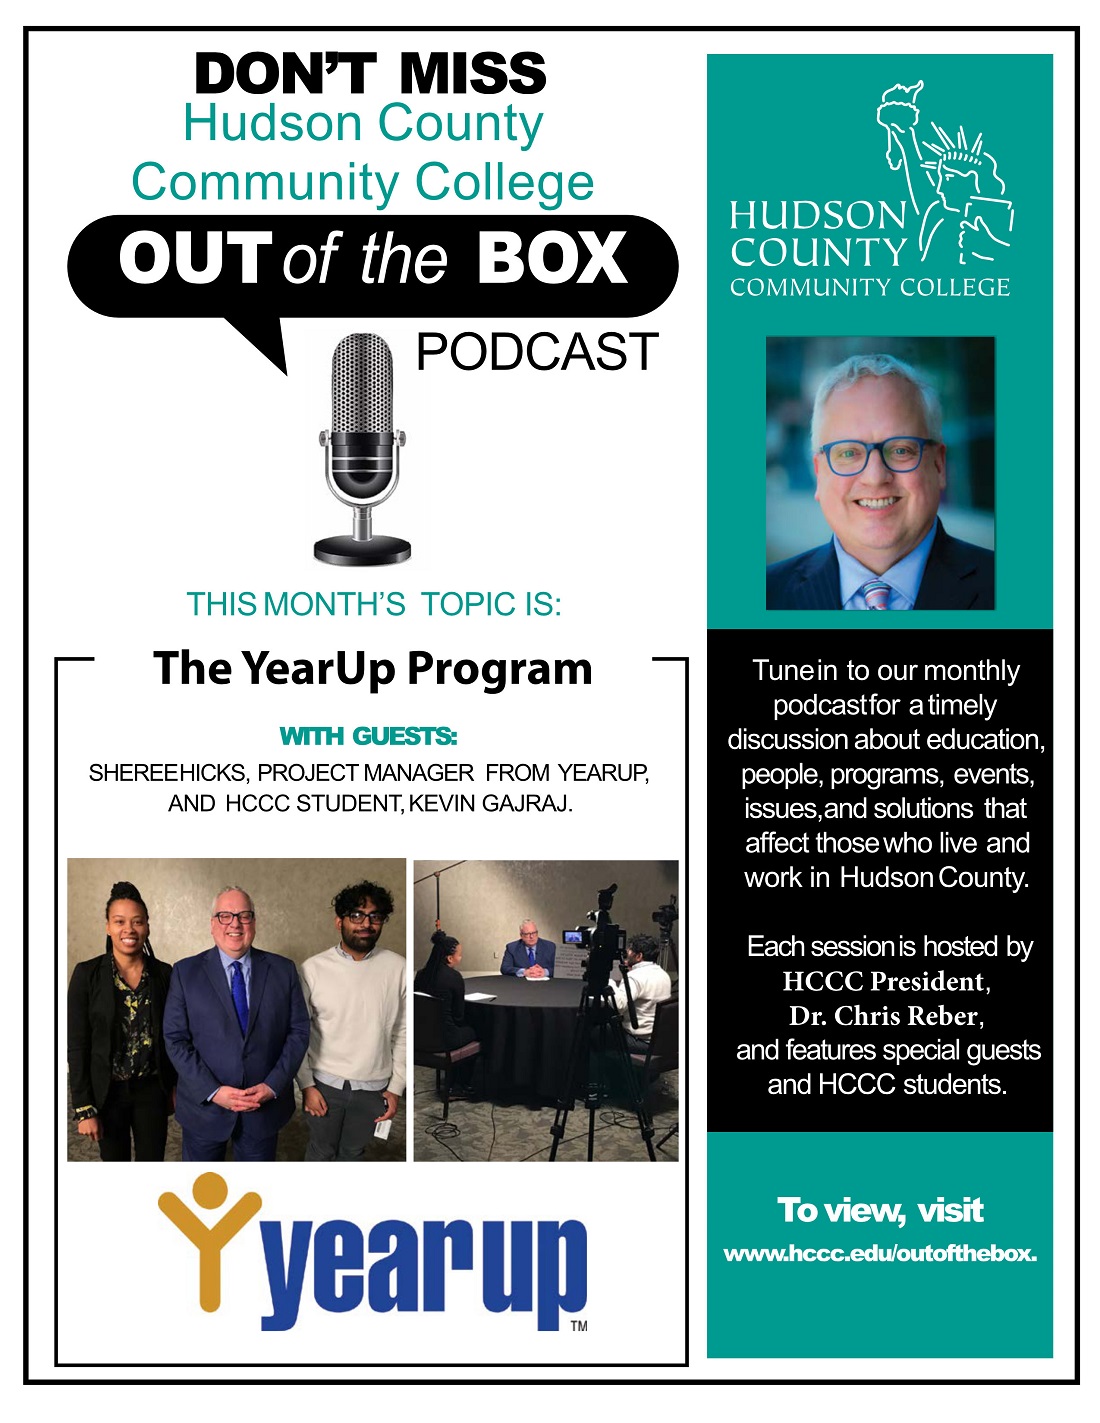 Out of the Box - The YearUp Program